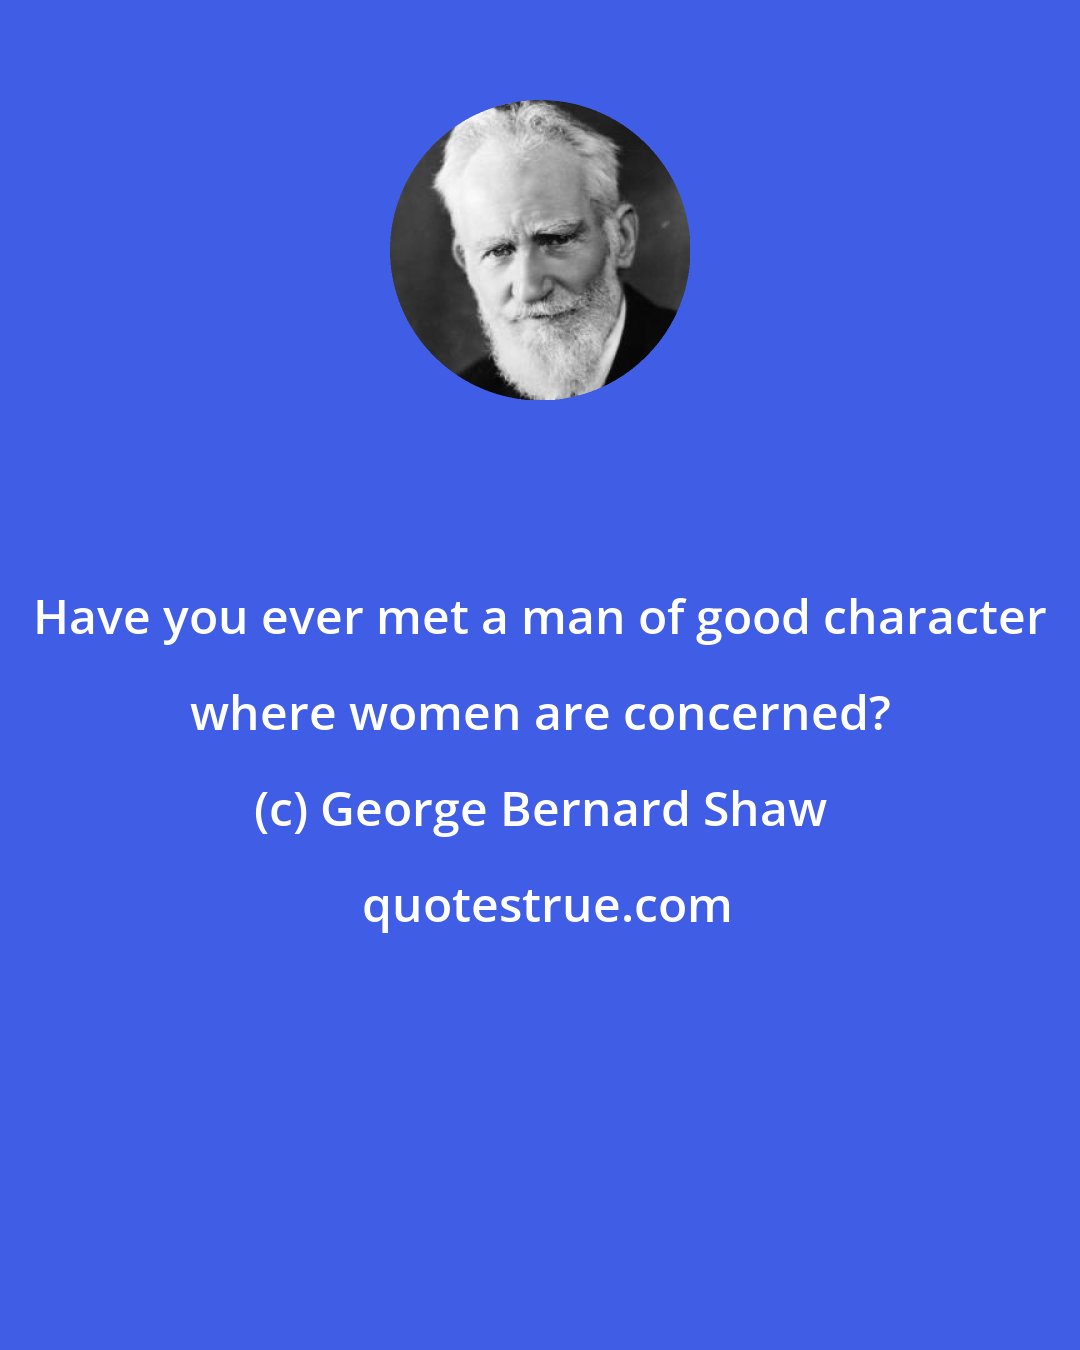 George Bernard Shaw: Have you ever met a man of good character where women are concerned?